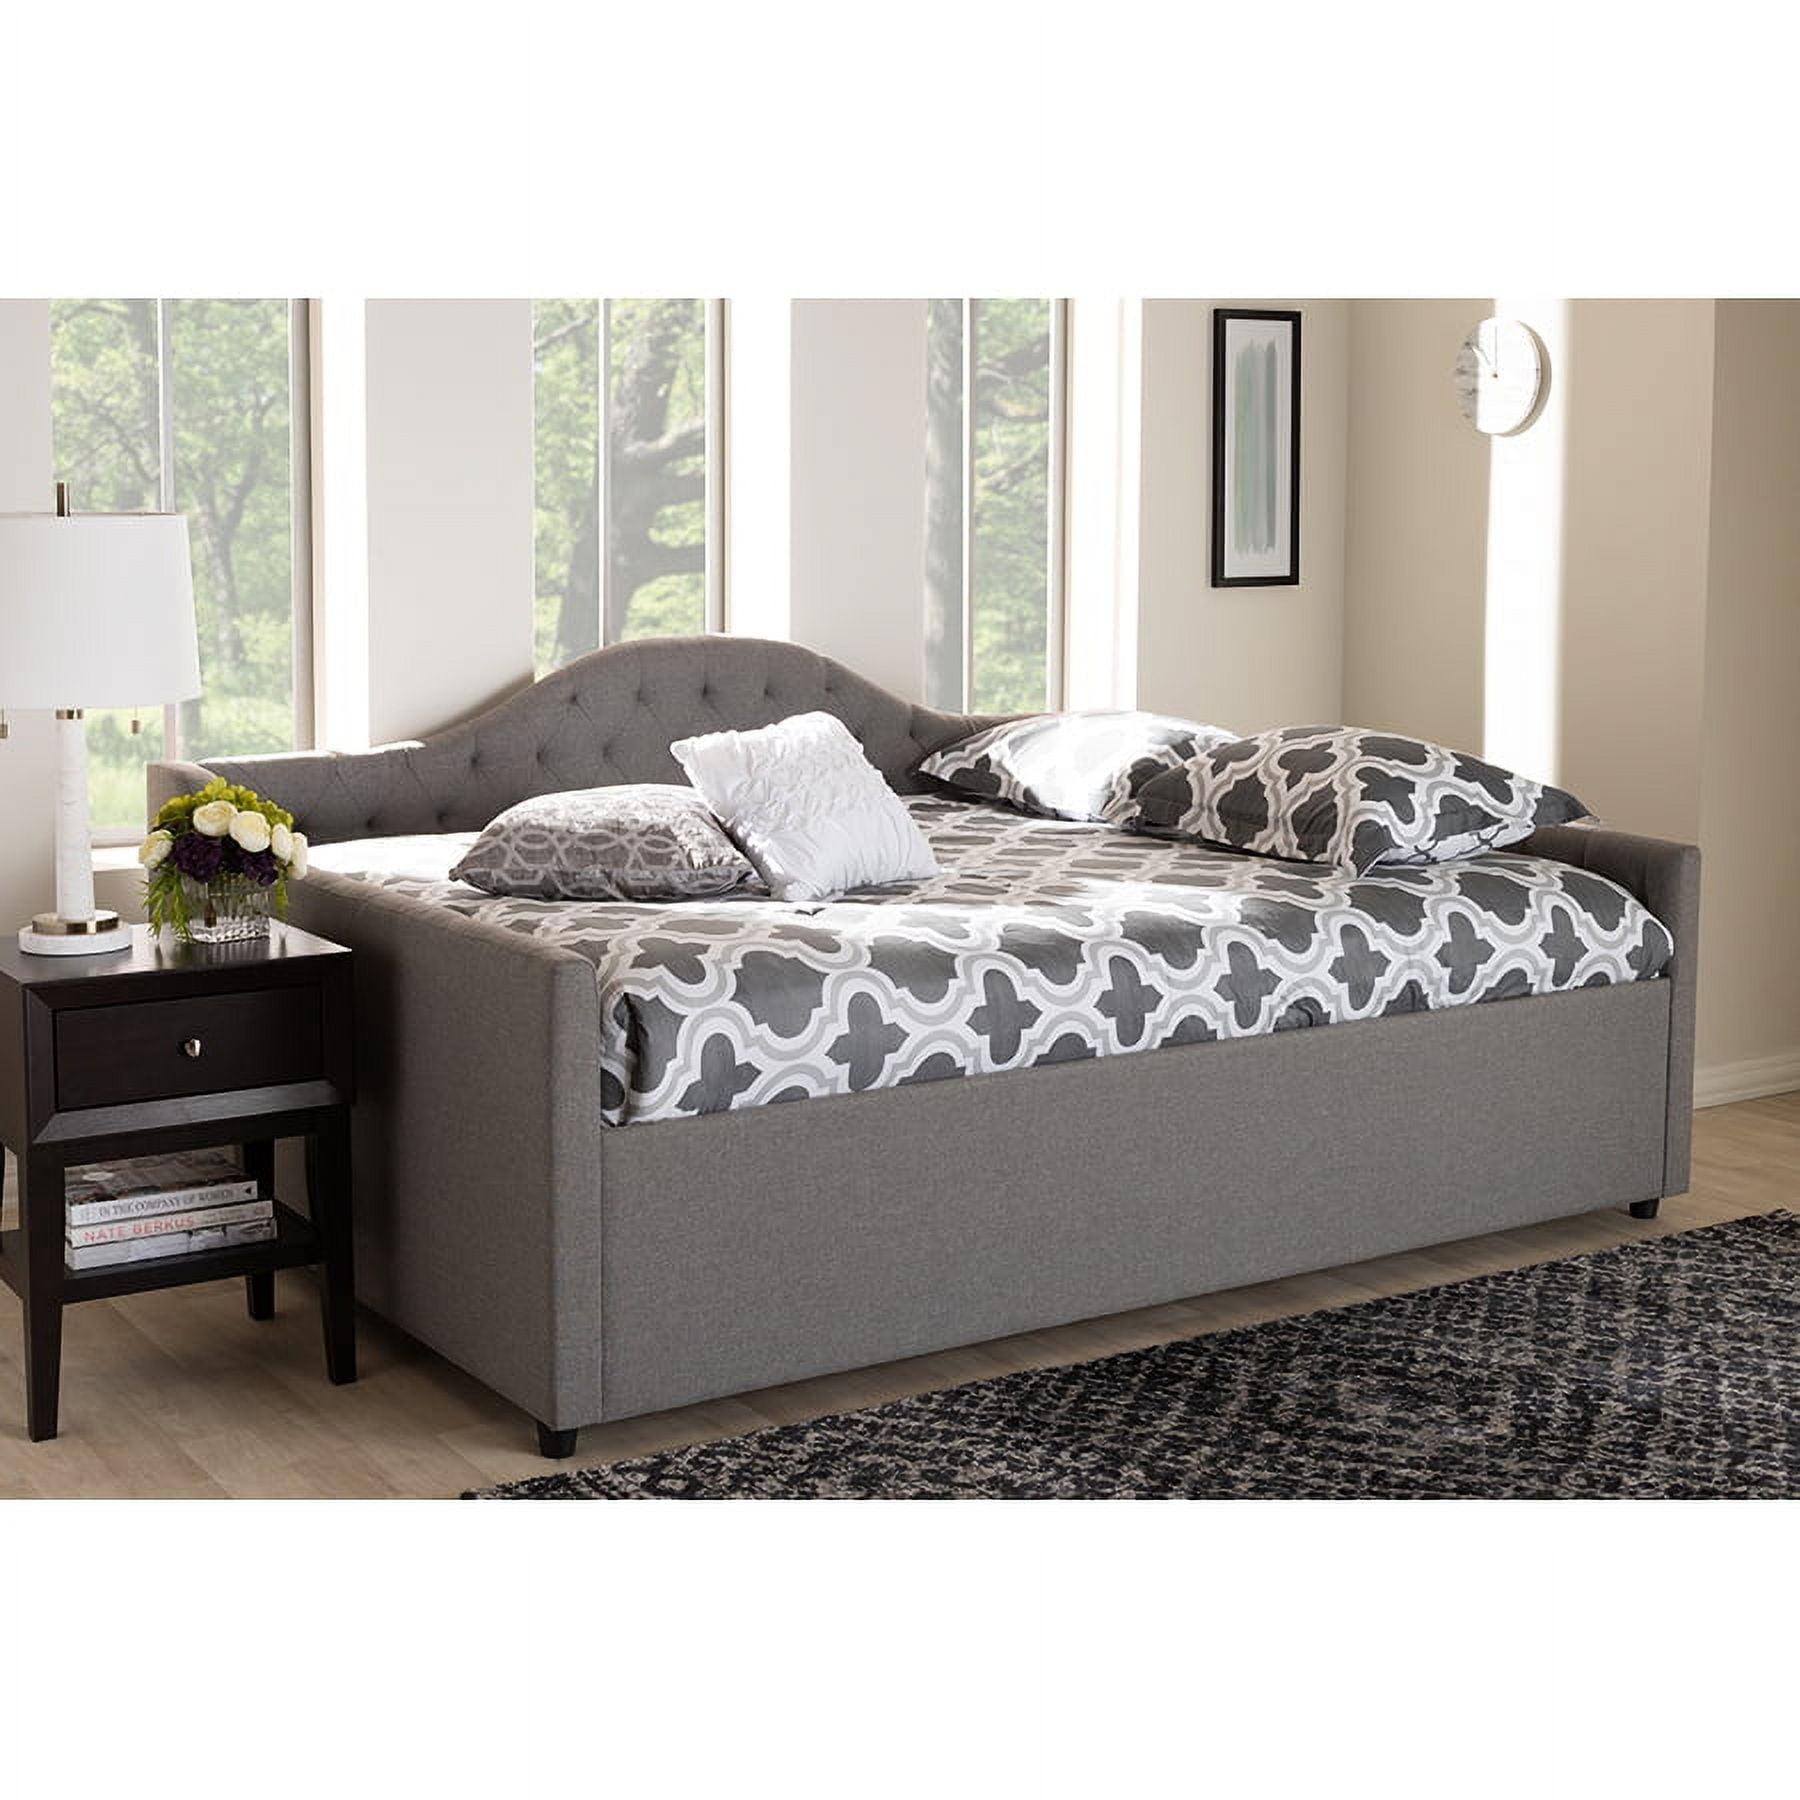 Eliza Full Size Grey Upholstered Tufted Daybed with Wood Frame